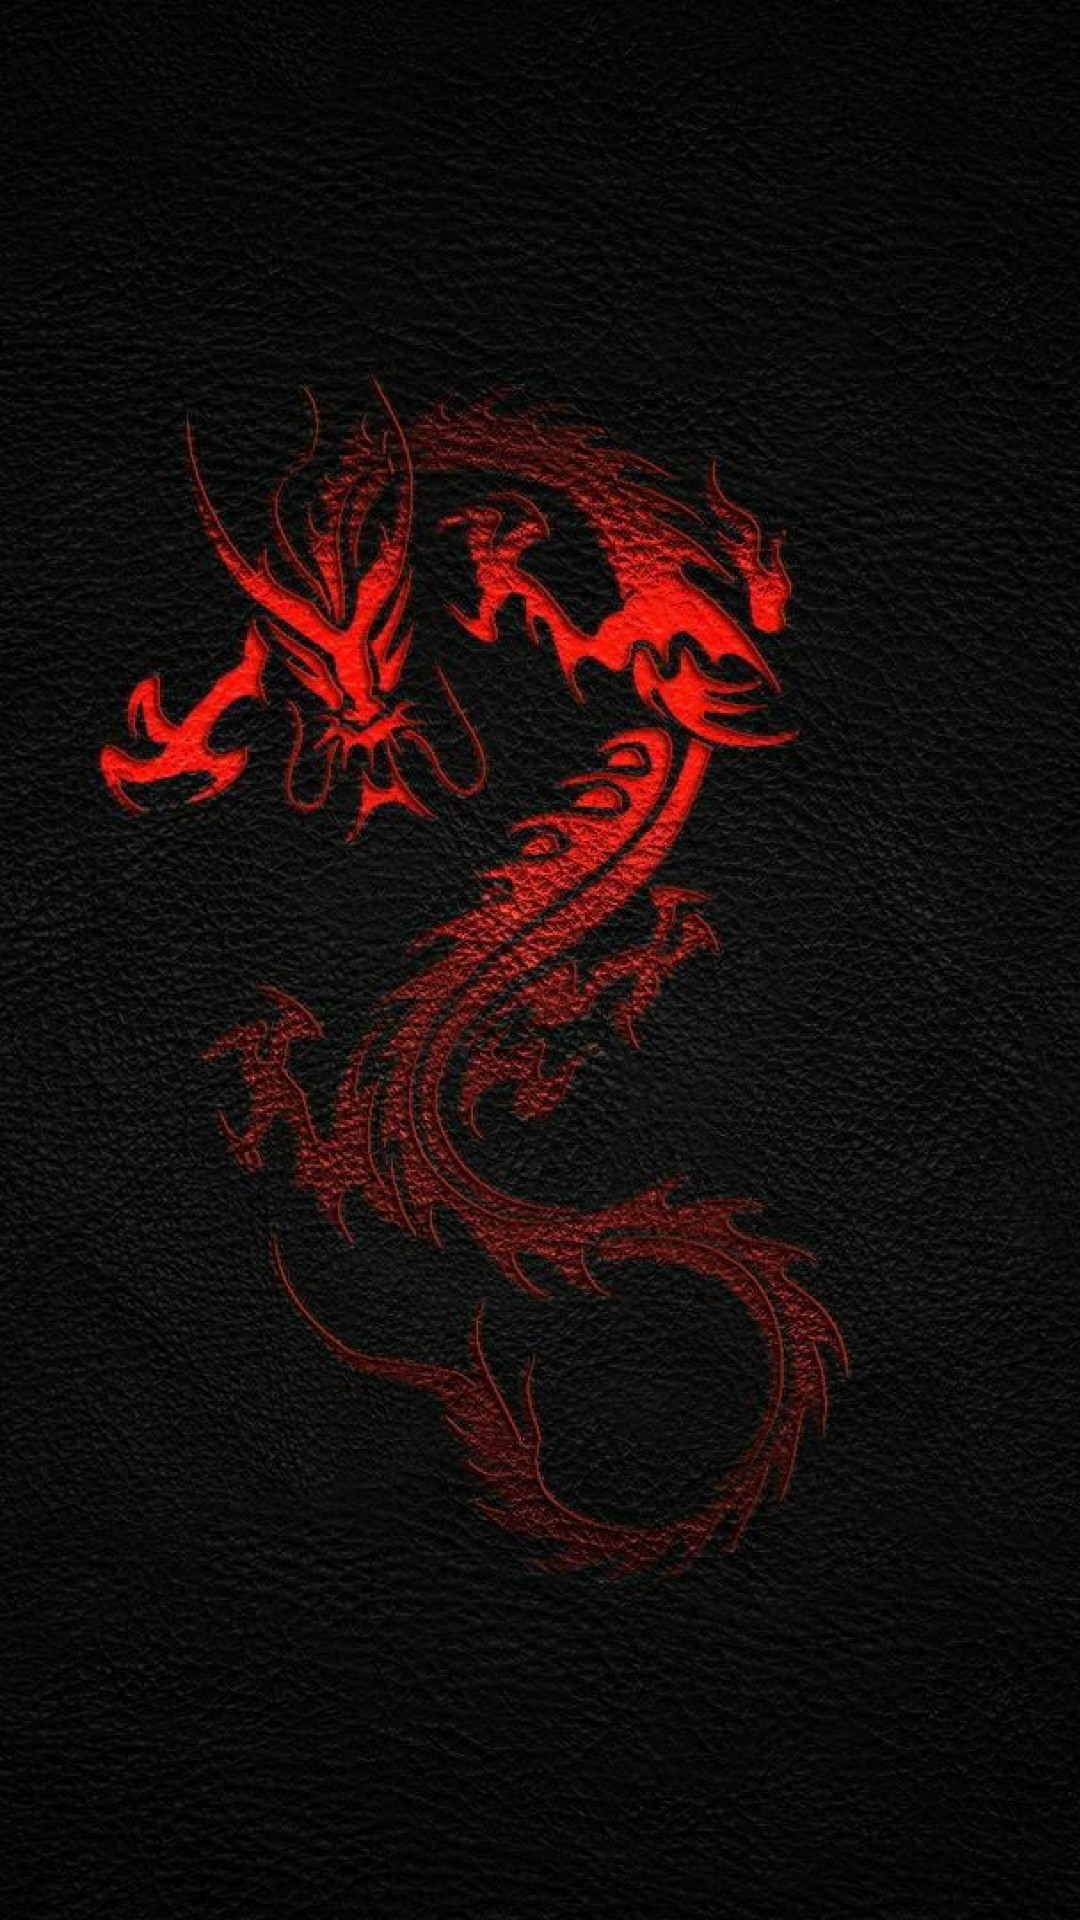 Black and Red iPhone Wallpaper (67+ images)